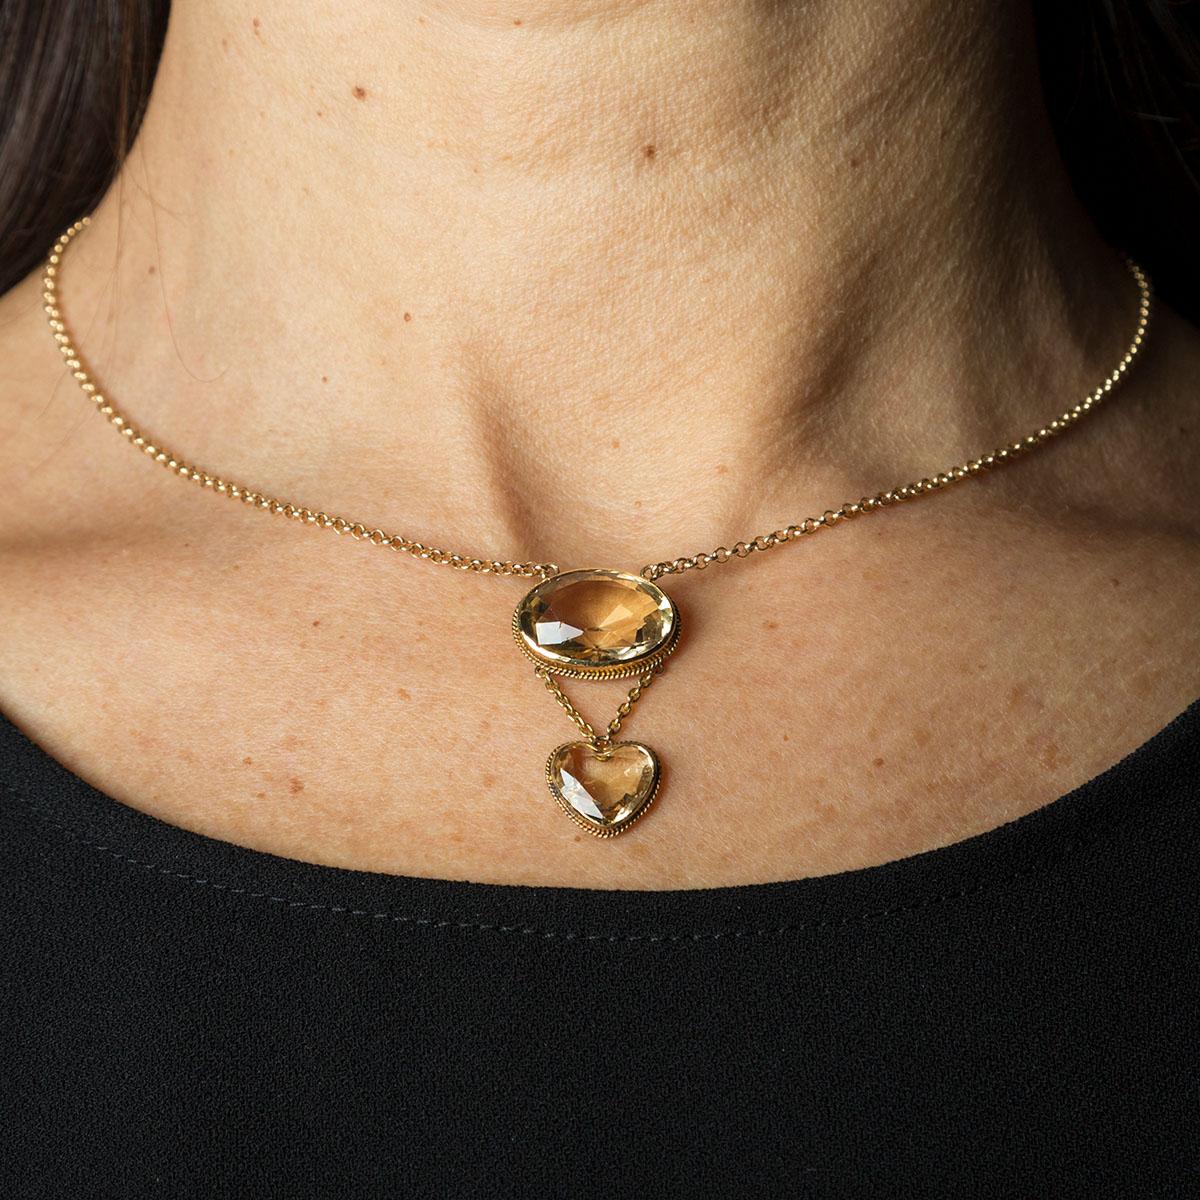 Fascinating 18 kt yellow gold necklace with citrine quartzes from the early 1900s. The colors of the citrine vary from lemon yellow to golden yellow up to orange shades. A jewel with great meanings, the magic of the era, the shapes and